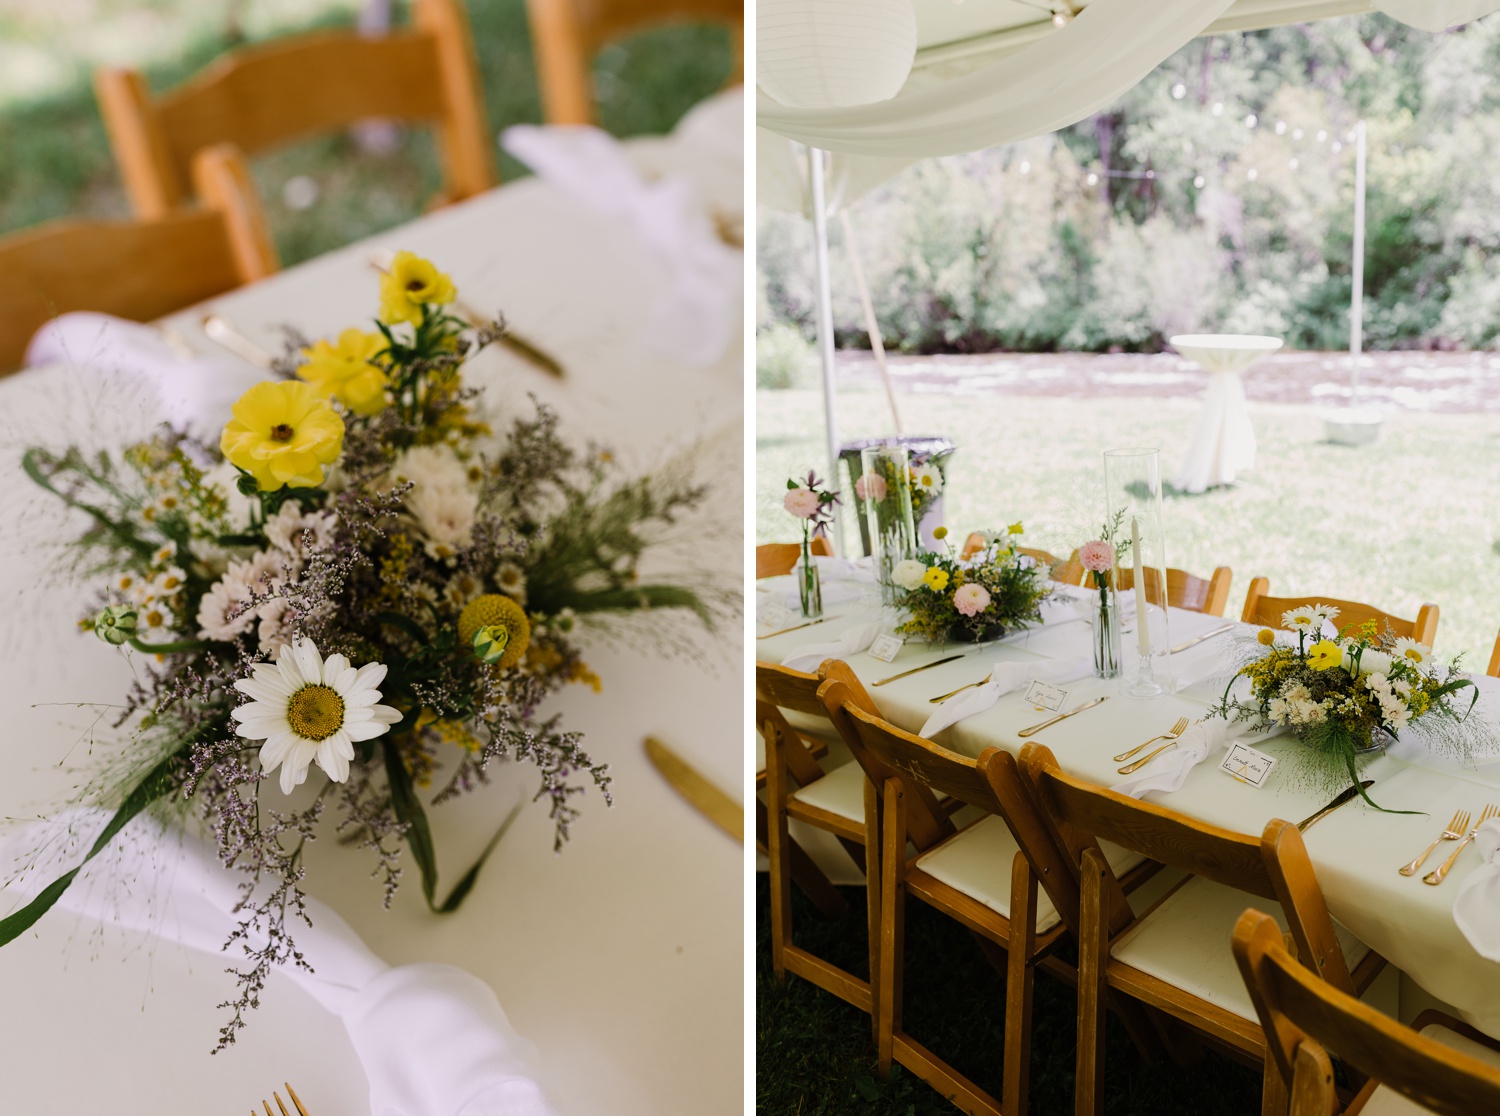 Wildflower wedding centerpiece filled with daisies, yellow cosmos, and lavender